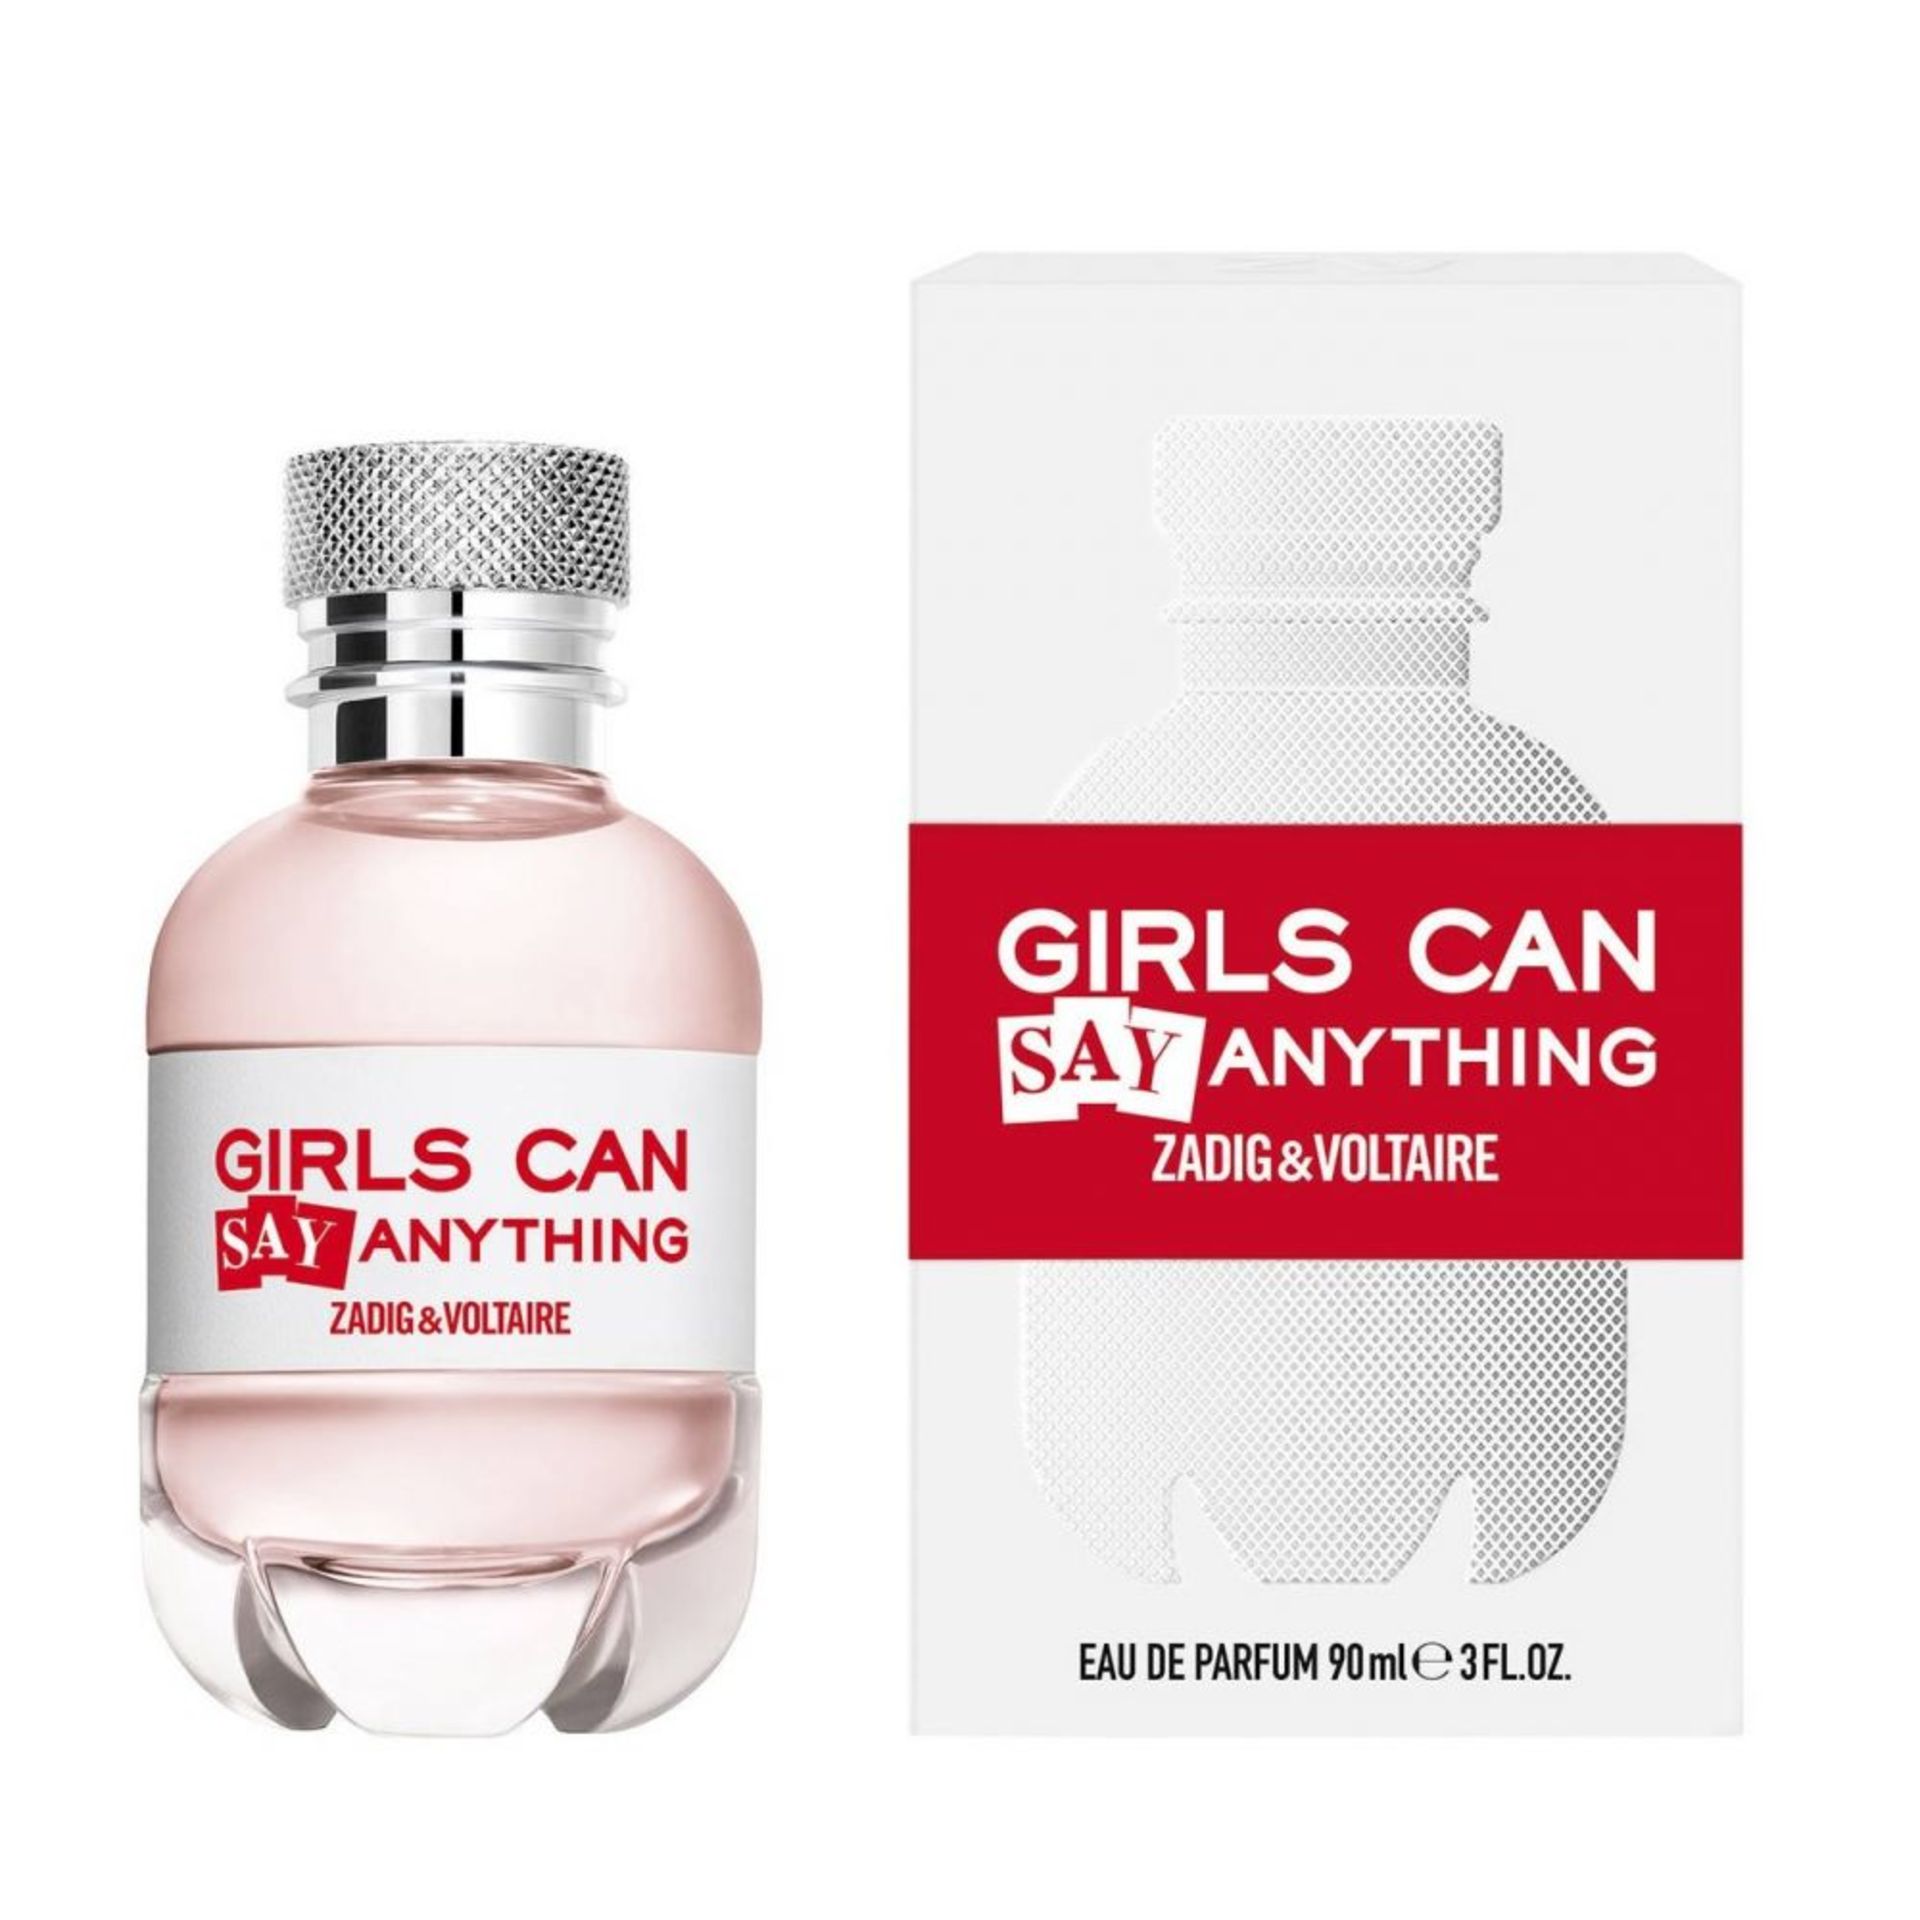 V Brand New Zadig & Voltaire Girls Can SAY Anything 30ml EDP Spray